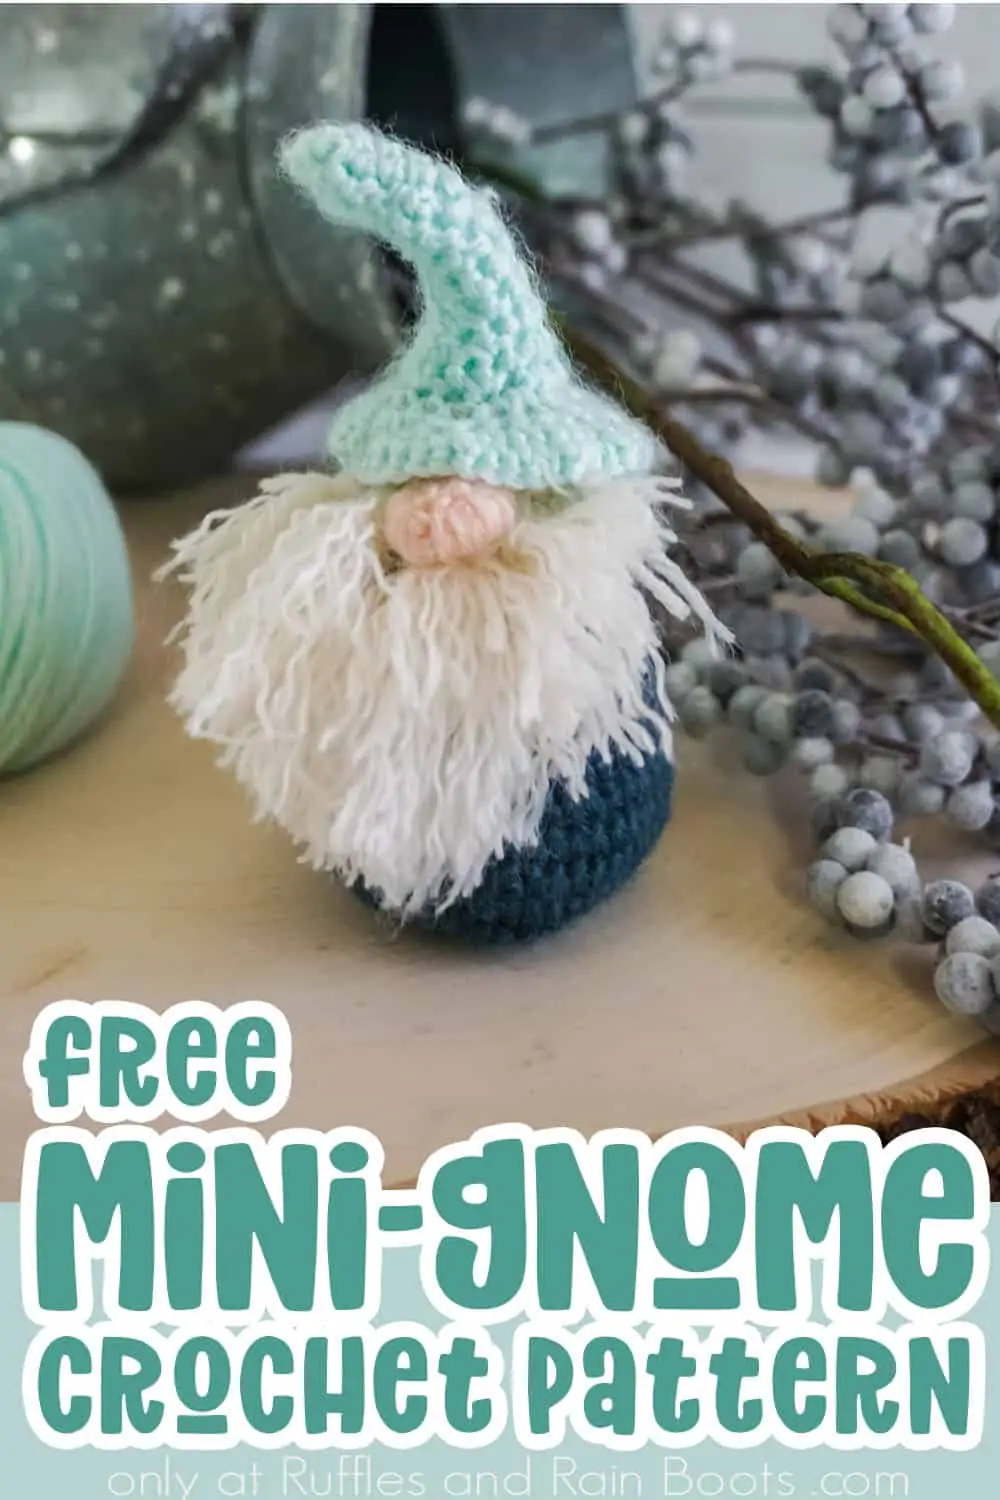 vertical image of an adorable gnome with text which reads free mini gnome crochet pattern from ruffles and rain boots